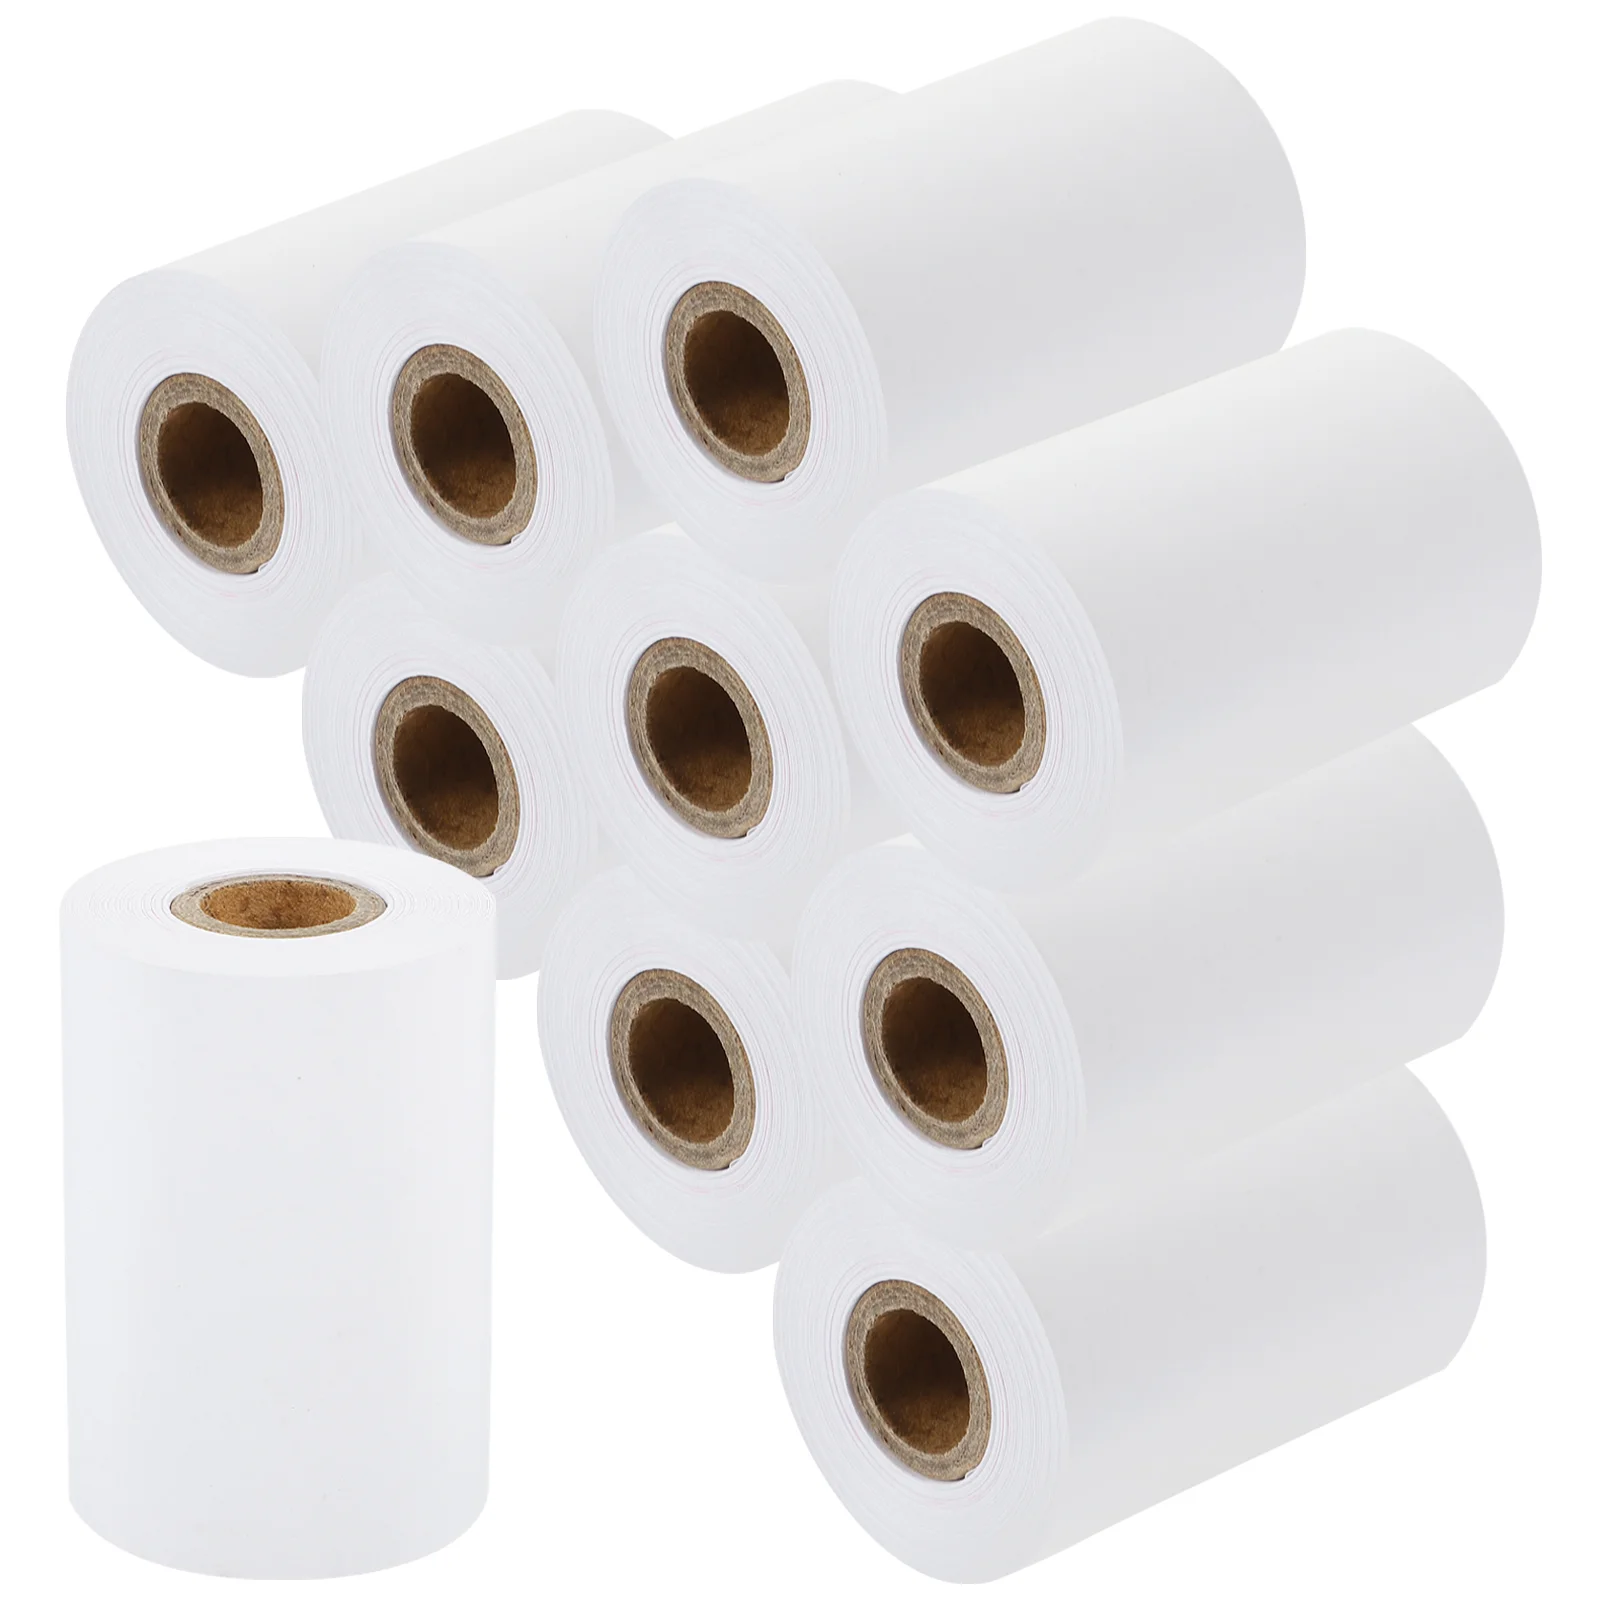 

10 Rolls Thermal Till Rolls Blank Thermal Papers Thermal Paper Roll for Credit Card Machine Retailers